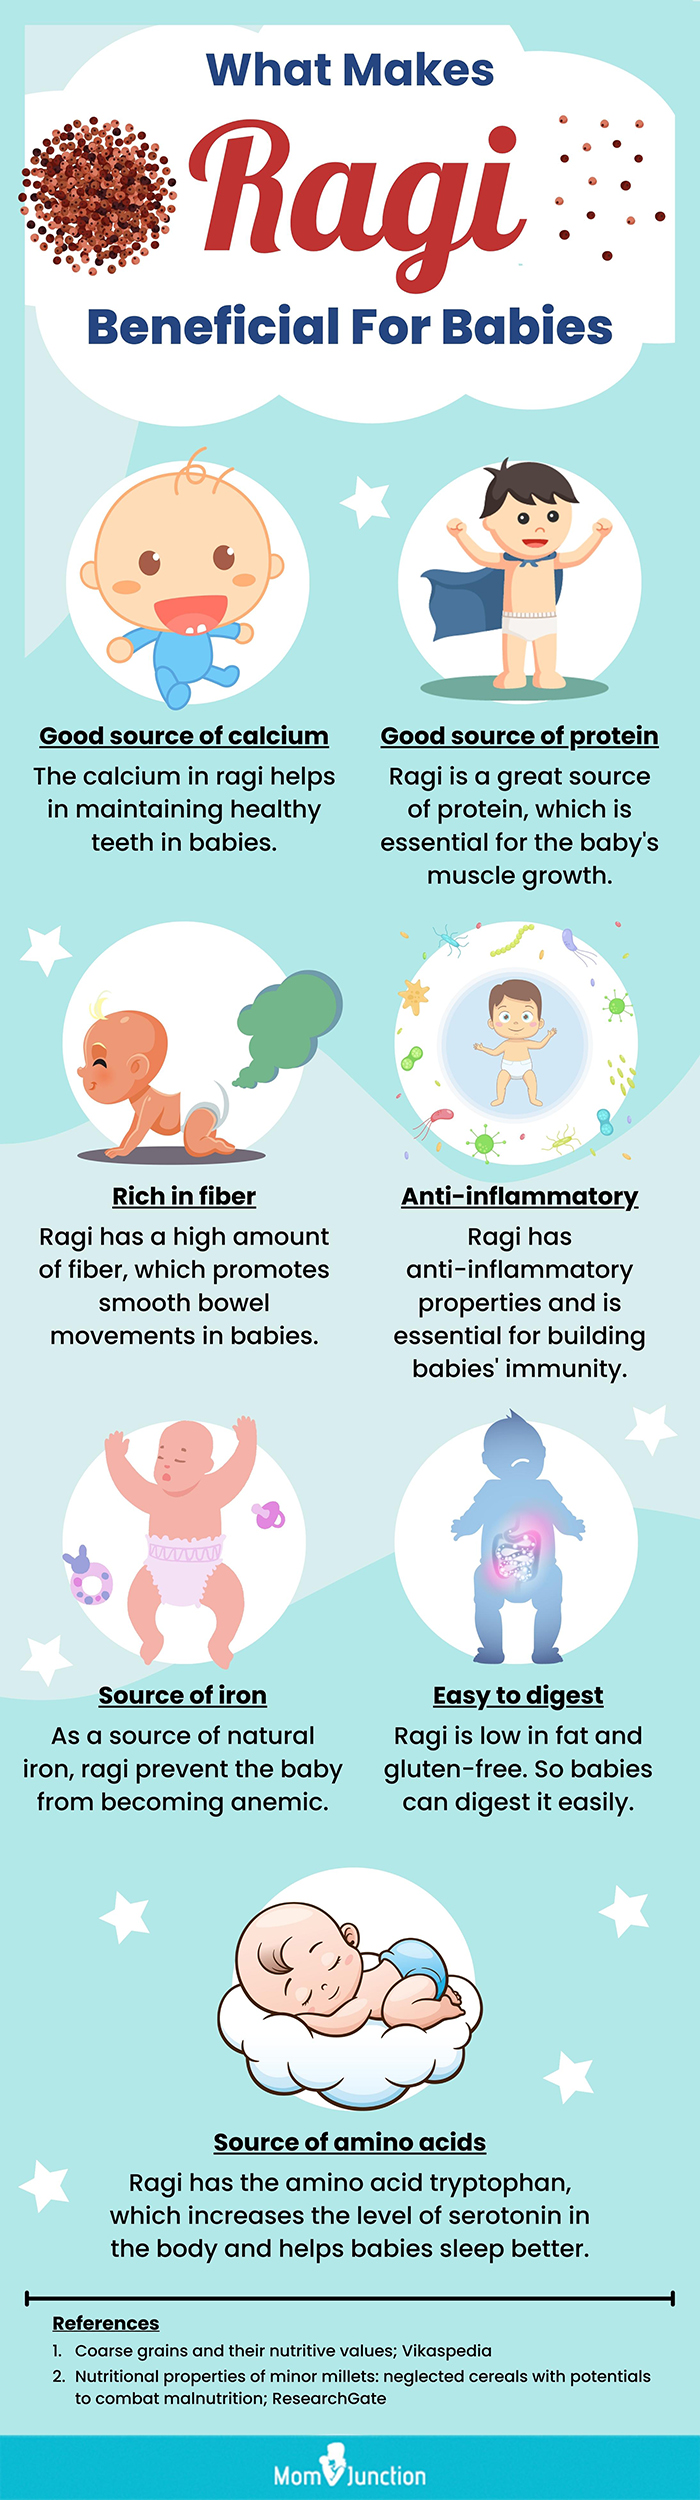 what makes ragi beneficial for babies (infographic)